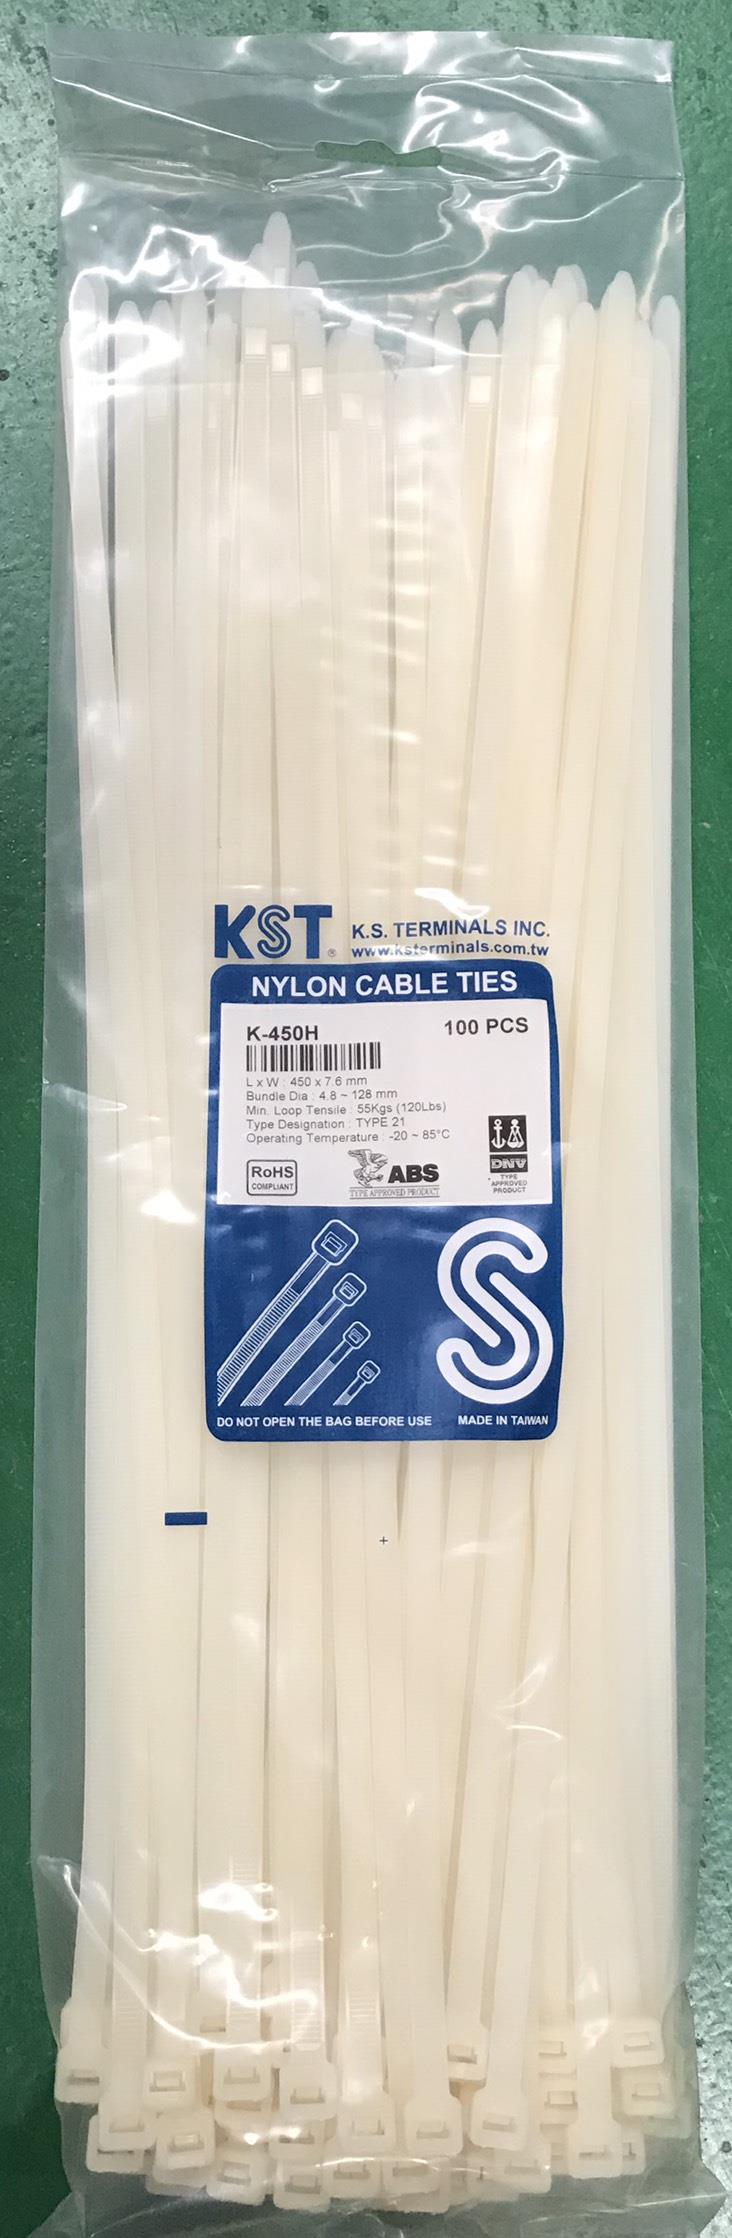 K-450H Cable ties 18"